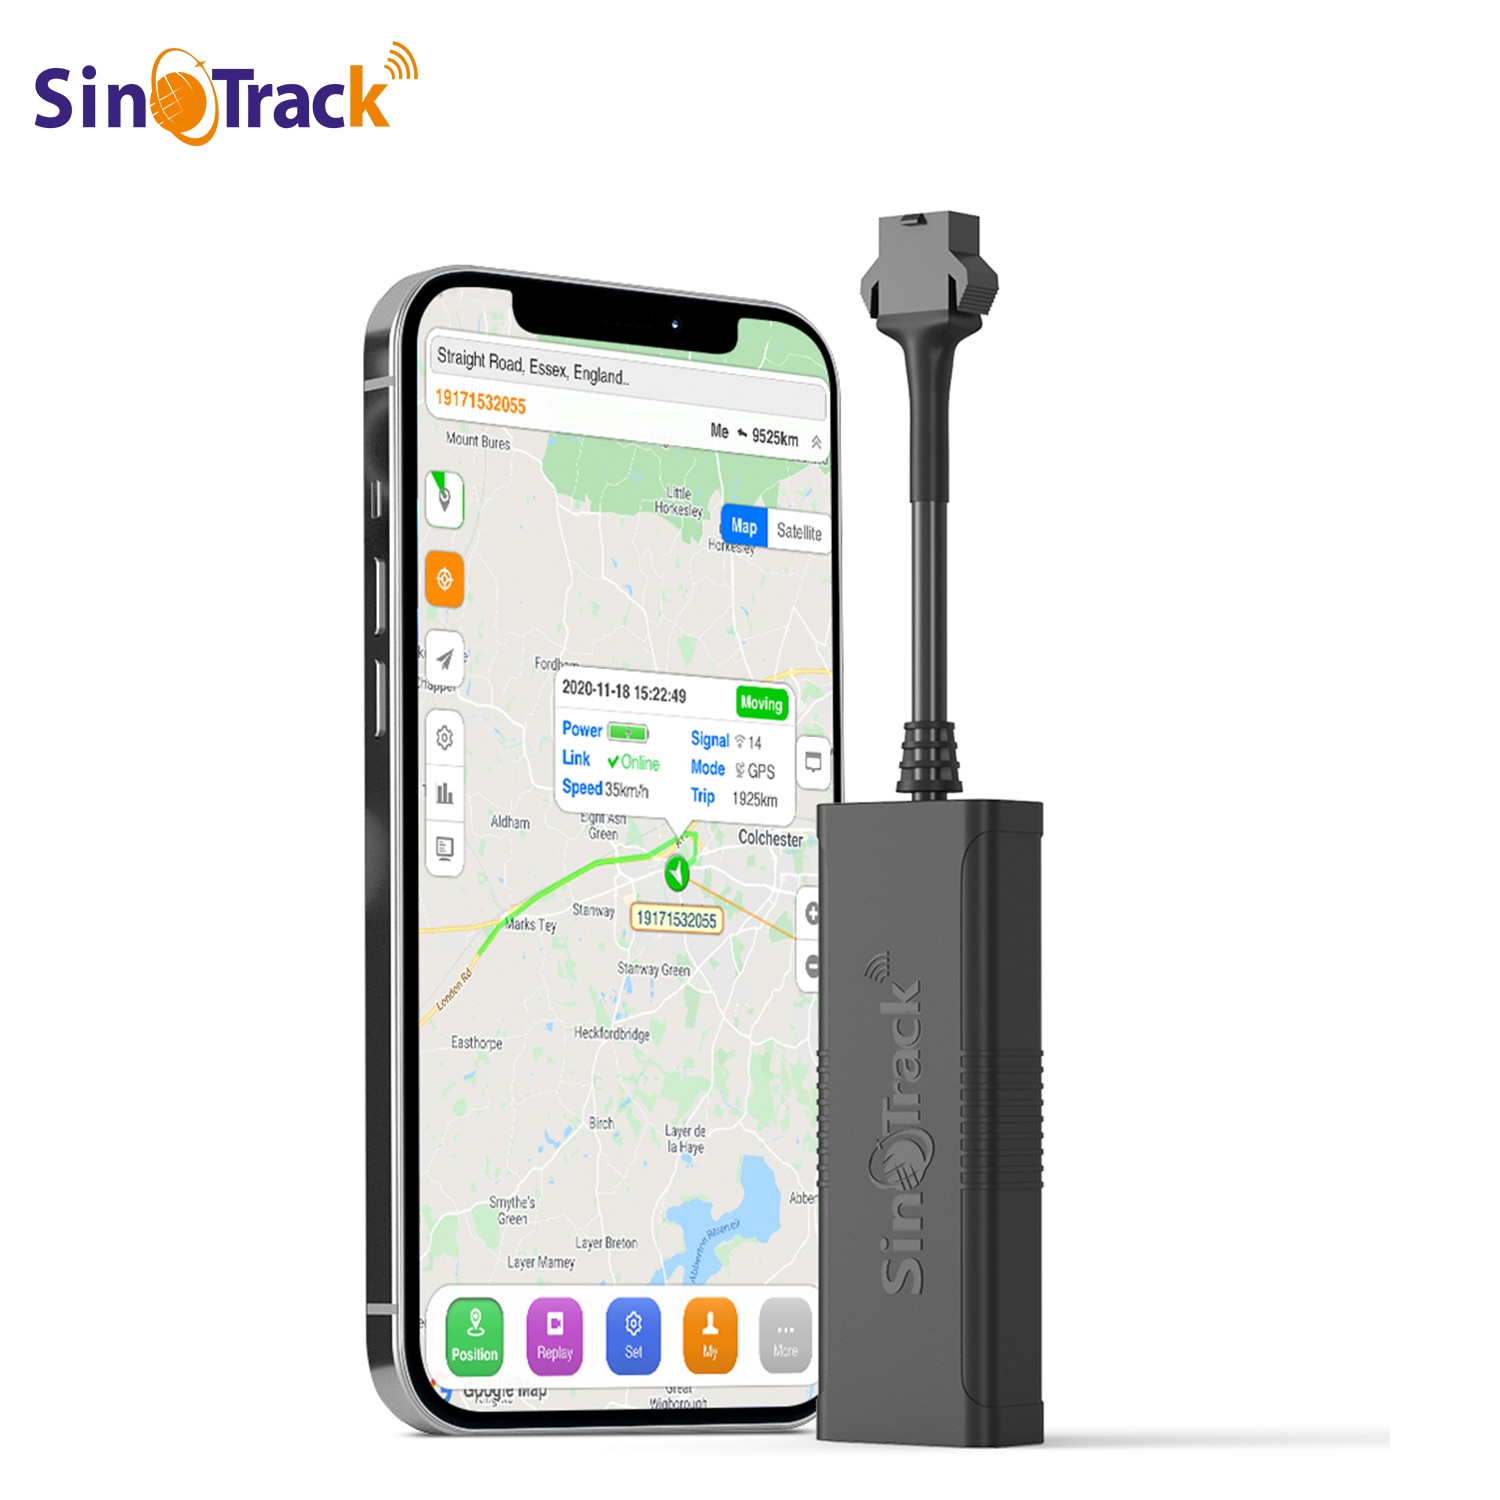 Car Vehicle Motorcycle GSM GPS Tracker Locator Global Real Time Tracking DeviceZ 